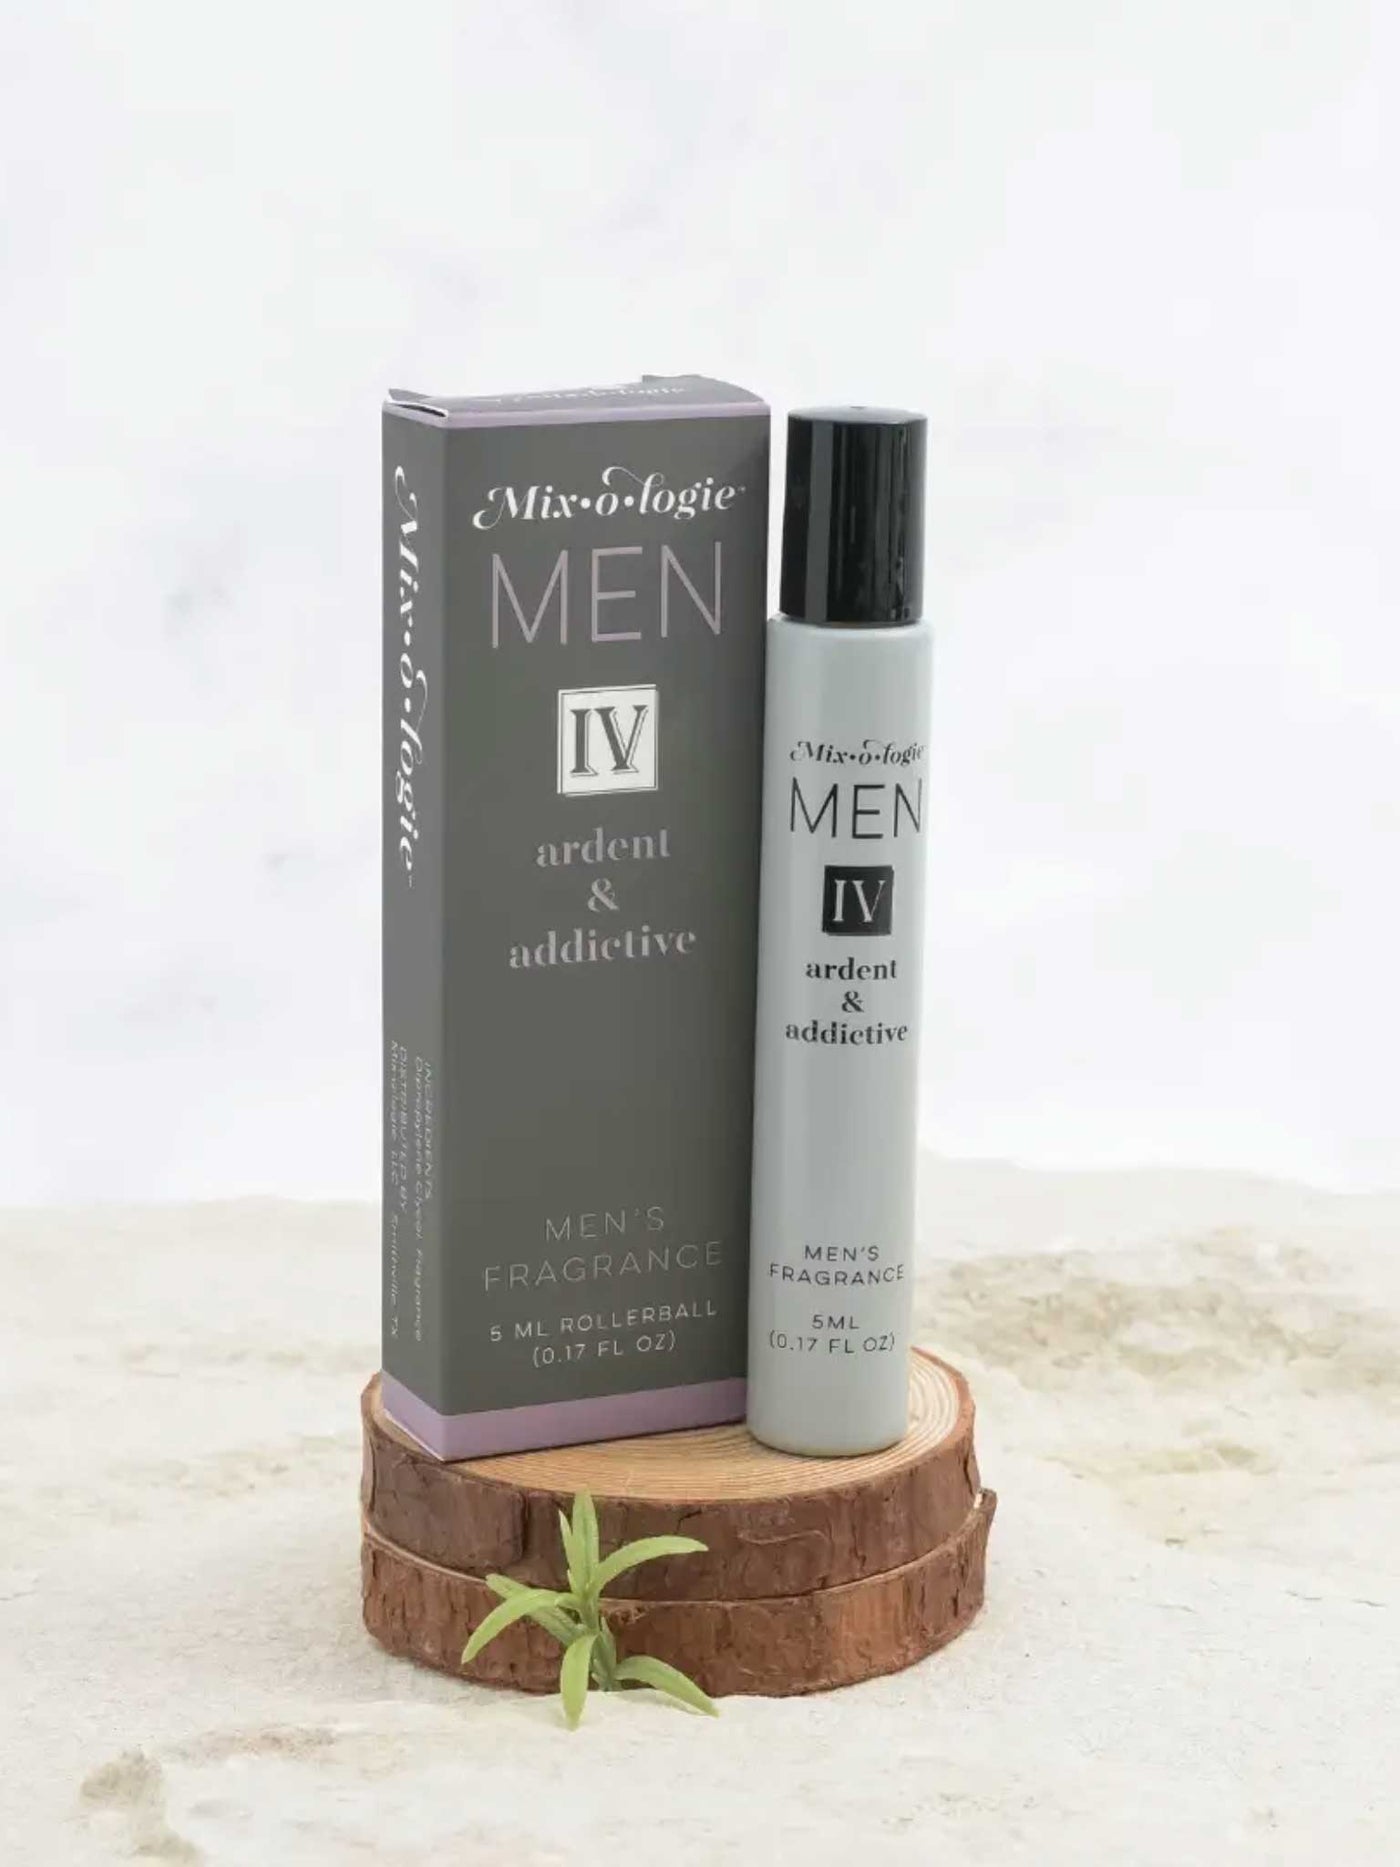 Men IV (Ardent & Addictive) Rollerball Cologne